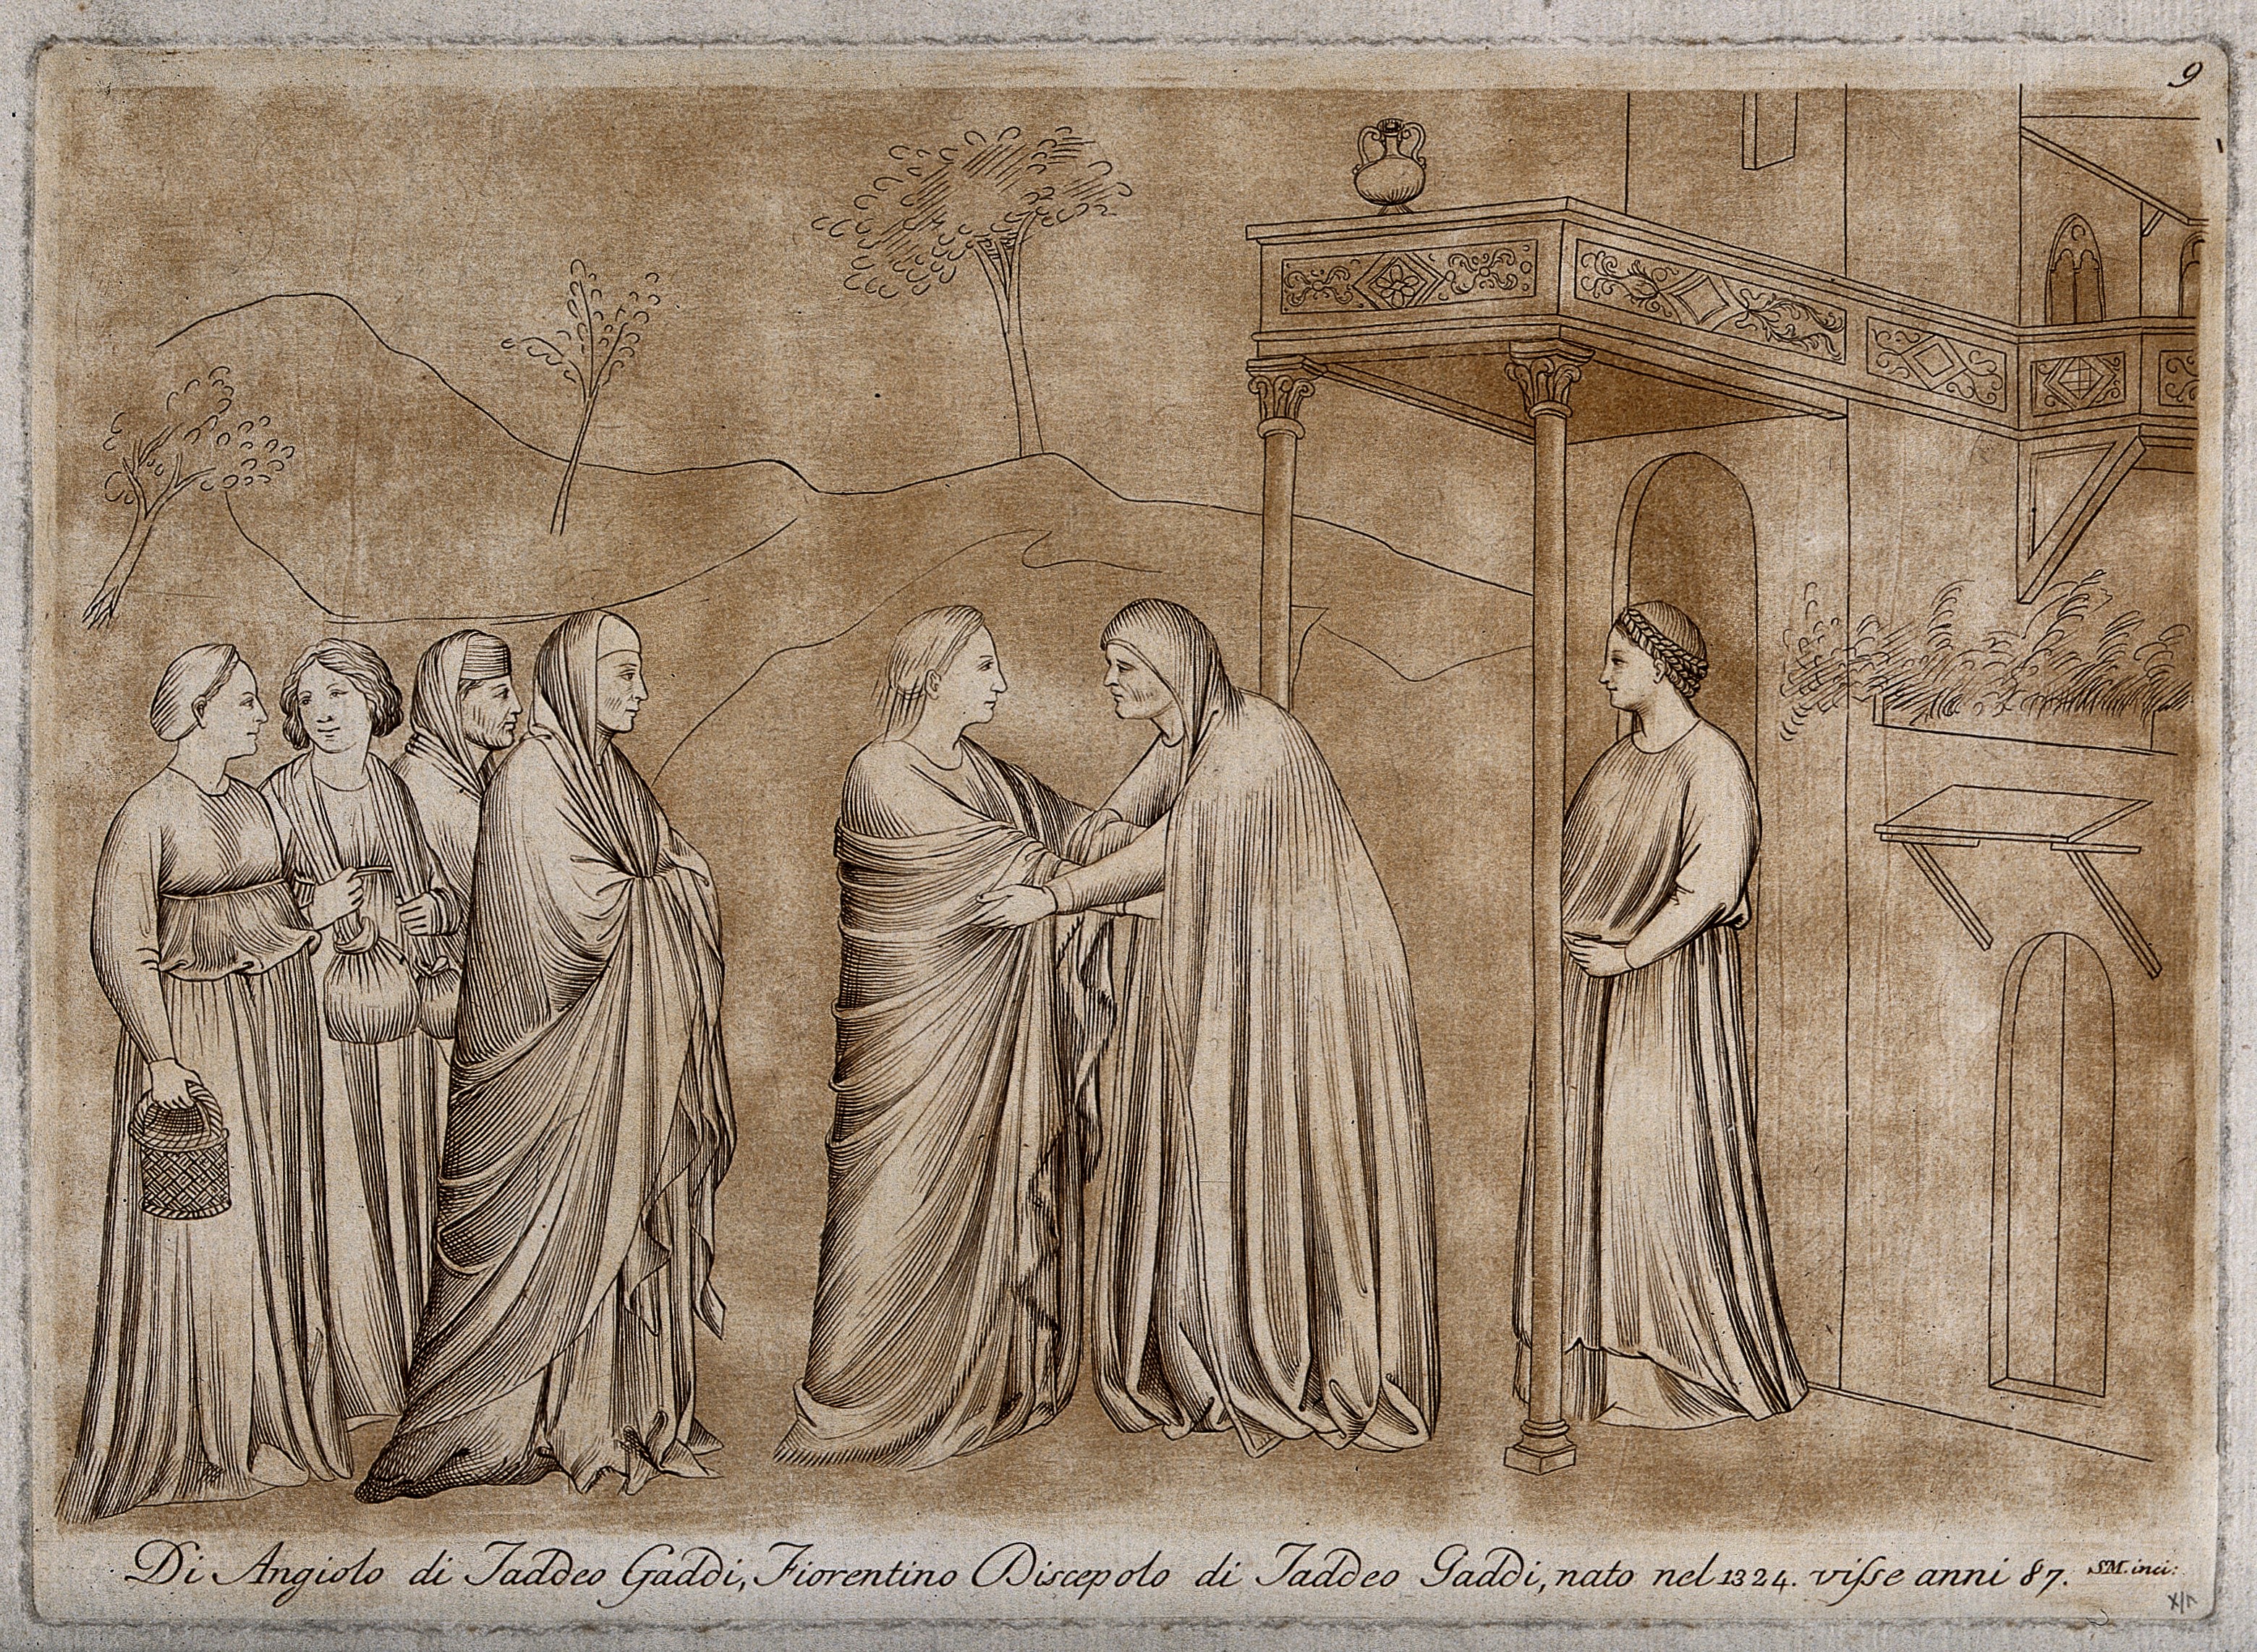 The Visitation of Mary to Elizabeth (?). Engraving by S. Mul Wellcome V0034491